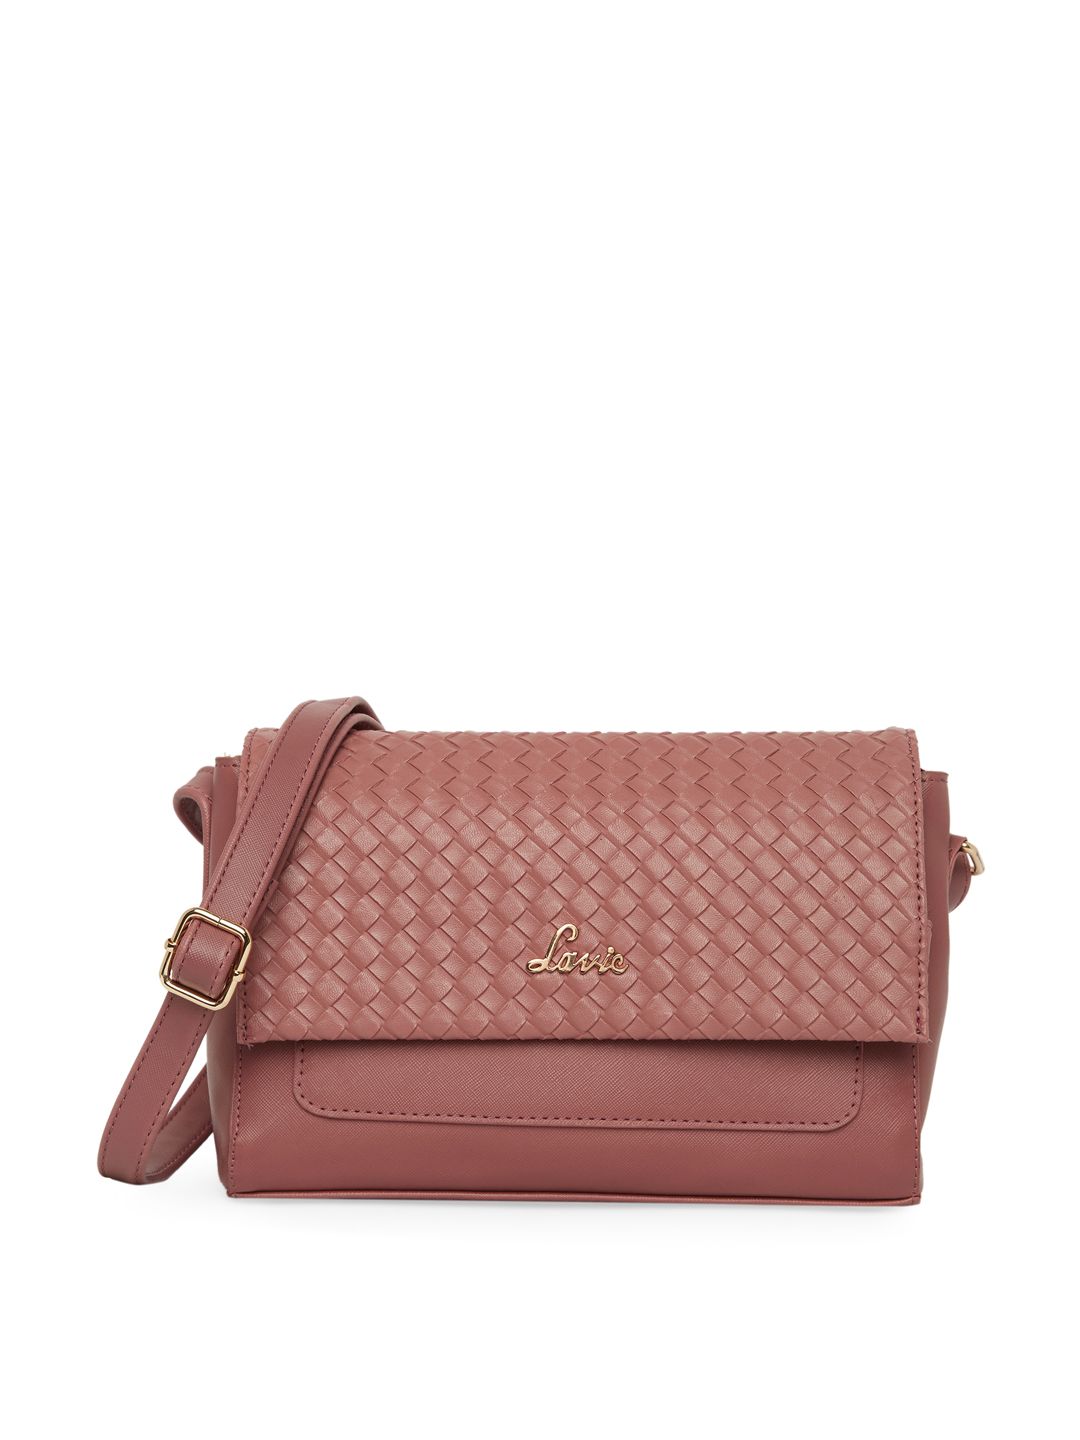 Lavie Pink Croc Textured Structured Sling Bag with Non-Detachable Sling Strap Price in India